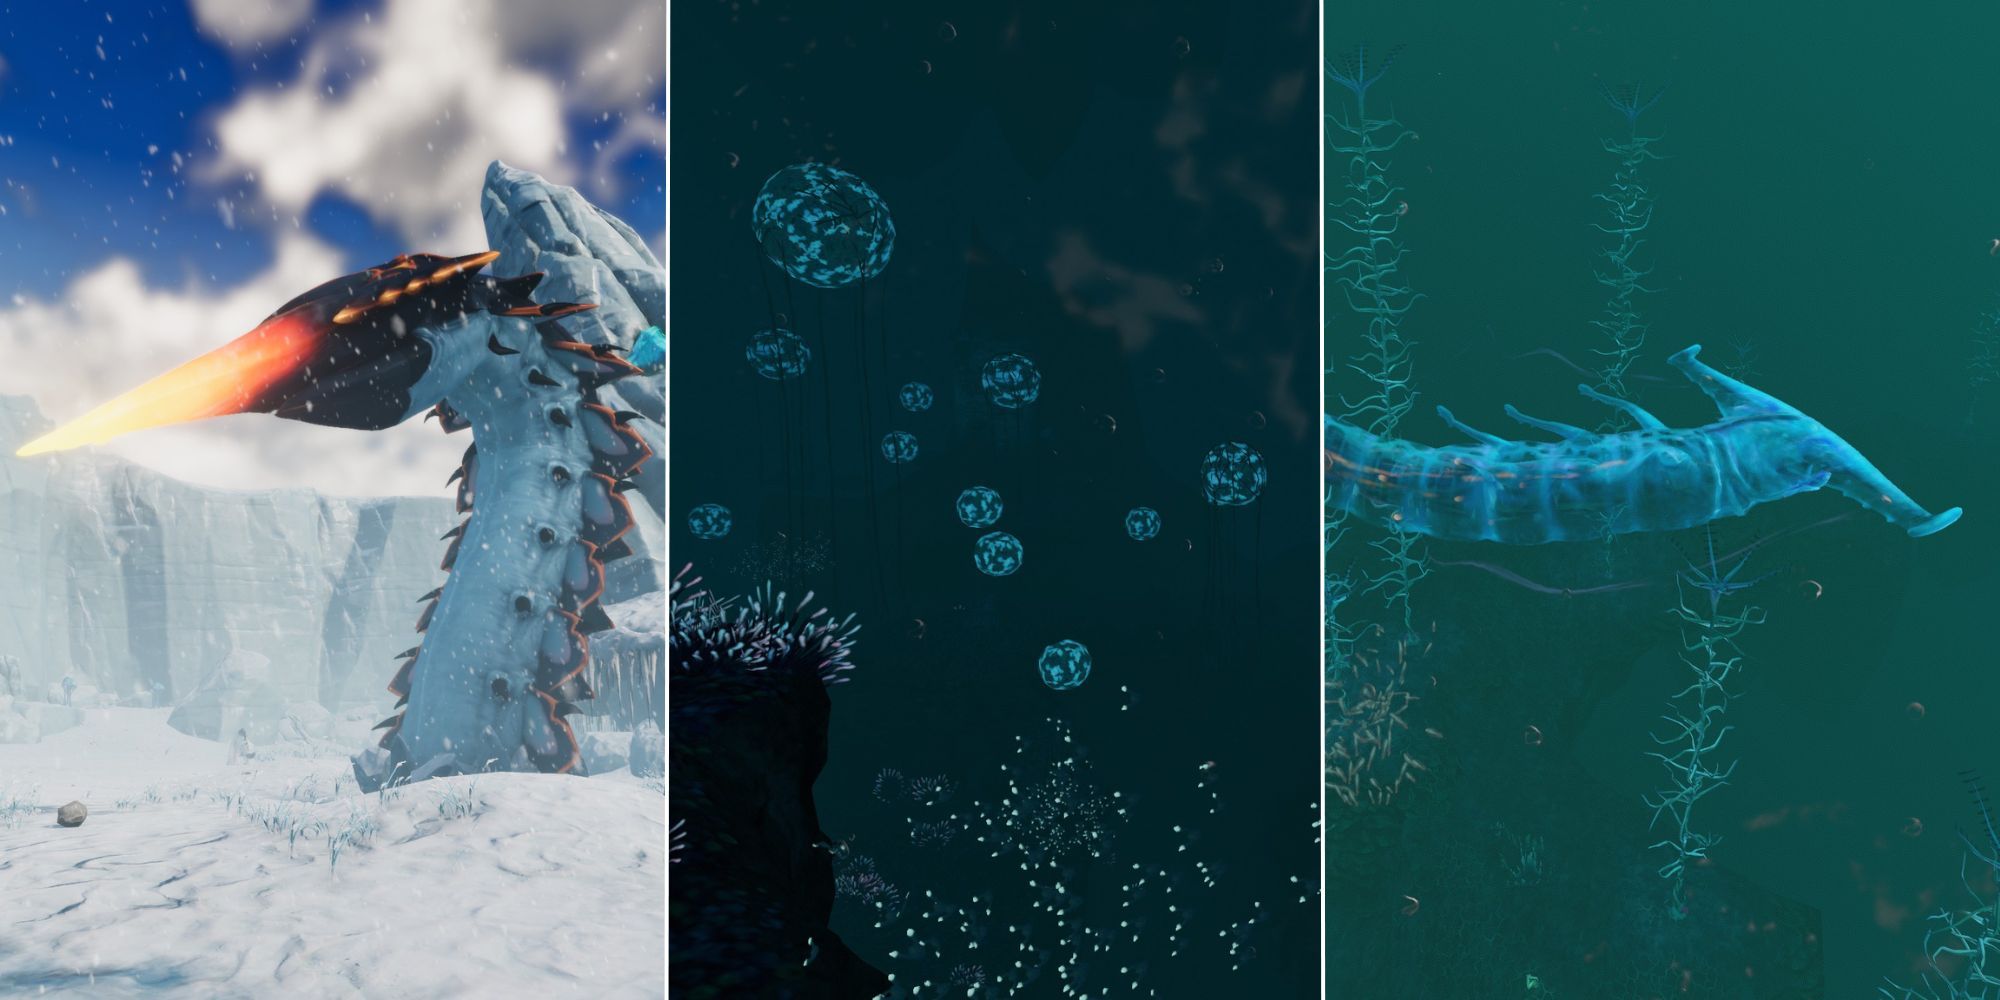 Subnautica  Split image of an Ice Worm, the Deep Grand Reef, and a Ghost Leviathan